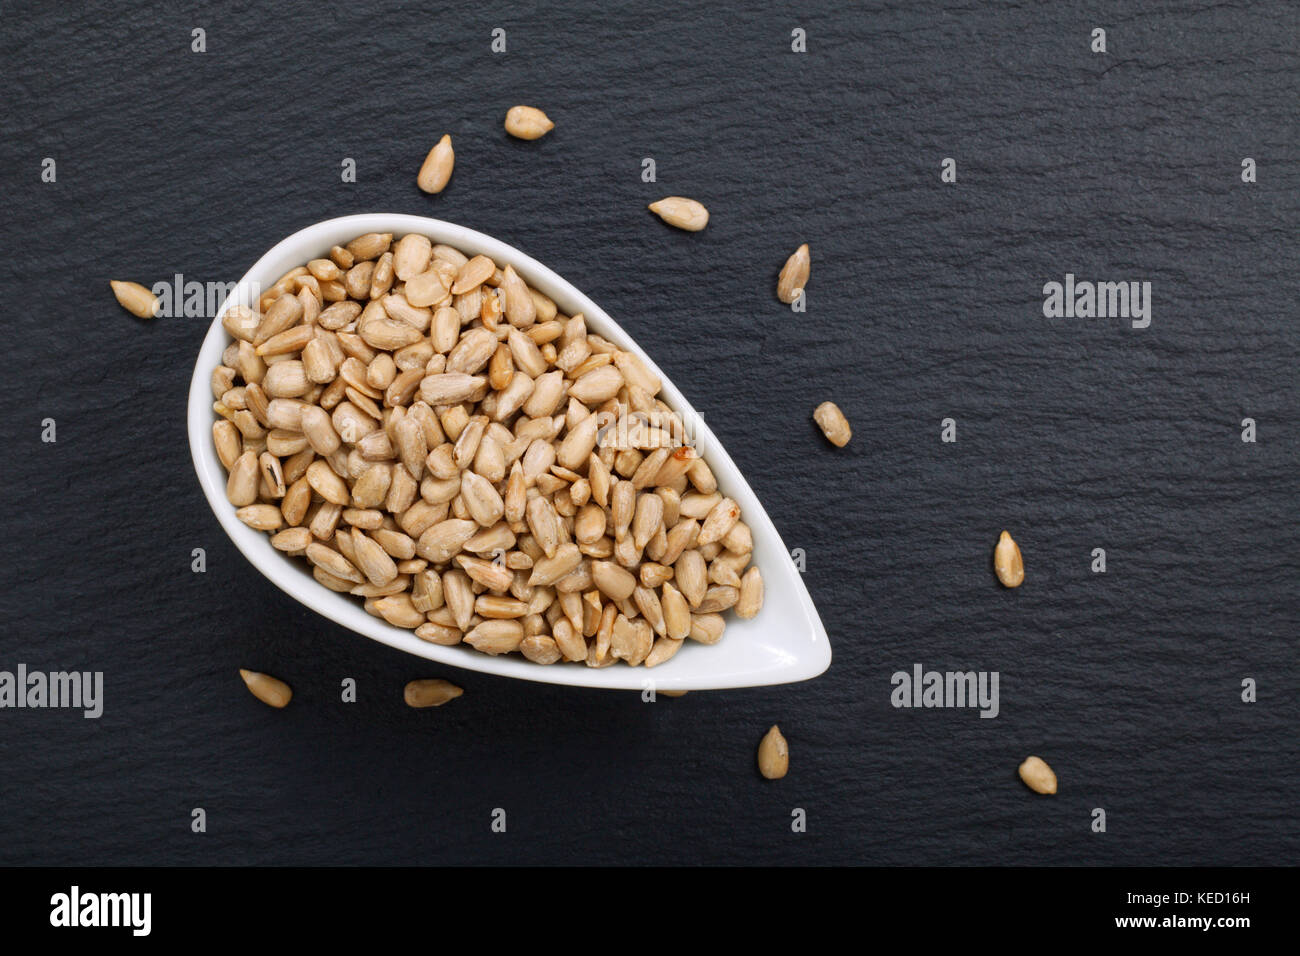 Organic sunflower seeds on black slate stone background with copy space Stock Photo